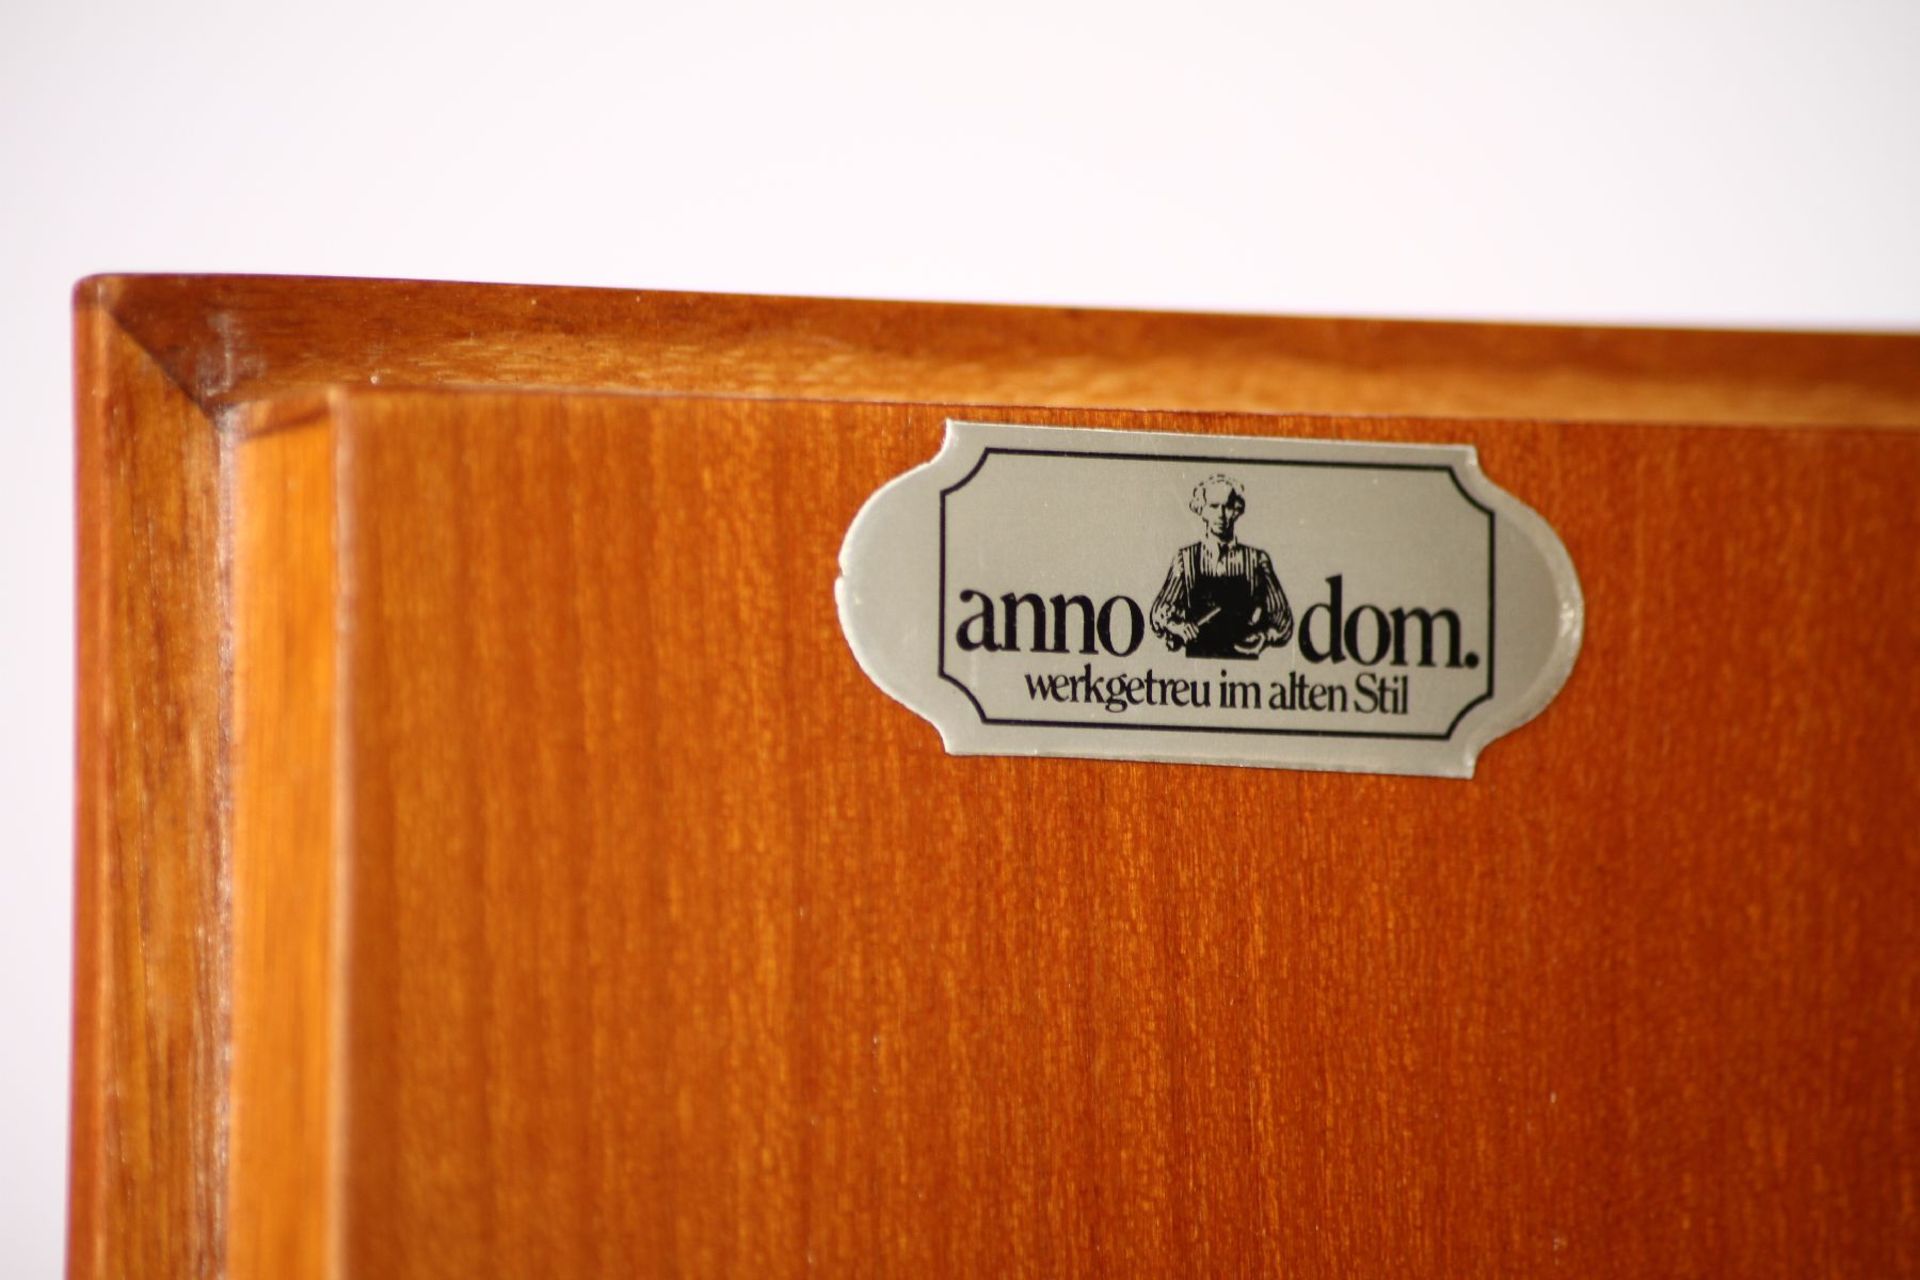 Multi-purpose cupboard, "Anno Dom", Germany, 1973, 2 pieces, cherry tree partly solid, cherry - Image 3 of 3